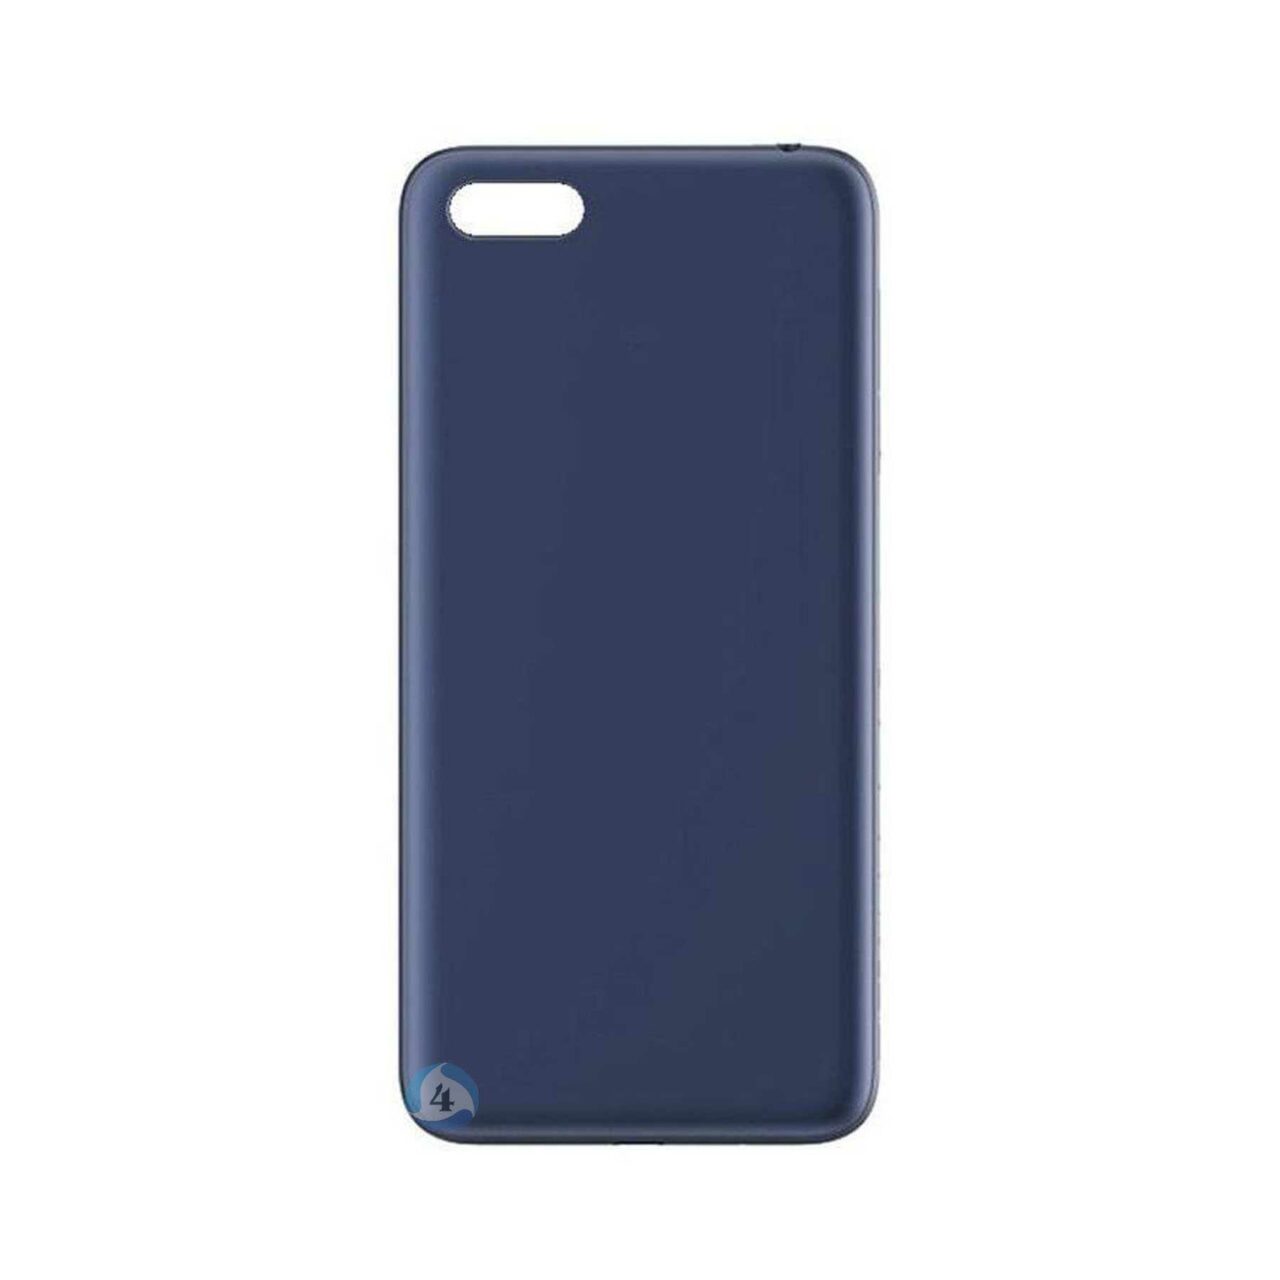 Huawei Y5 prime 2018 backcover blue